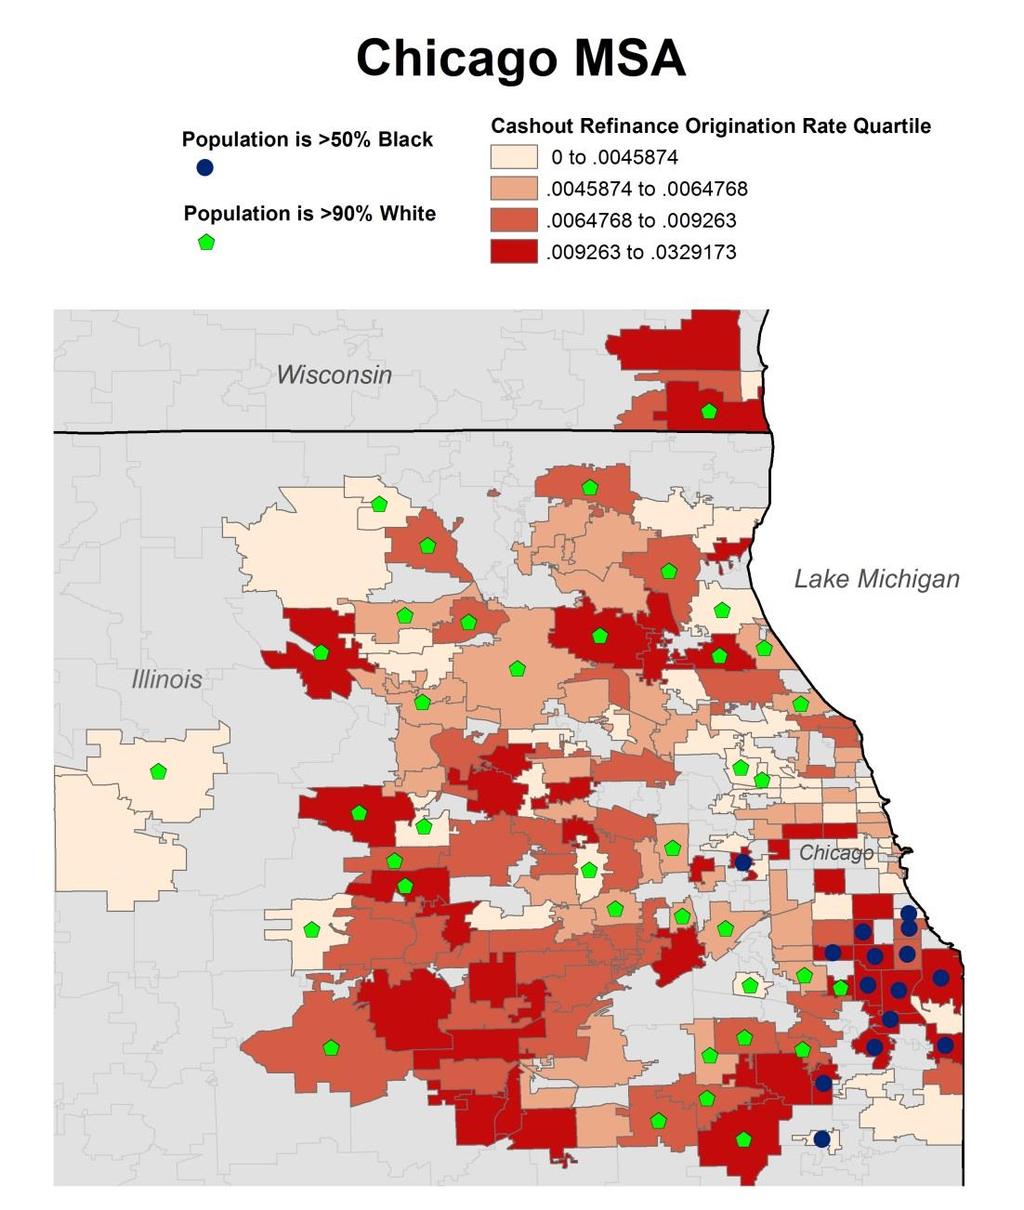 Geographic Variation Mean Cash-Out Refinancing Origination Rate as a Proportion of the Population 62 and